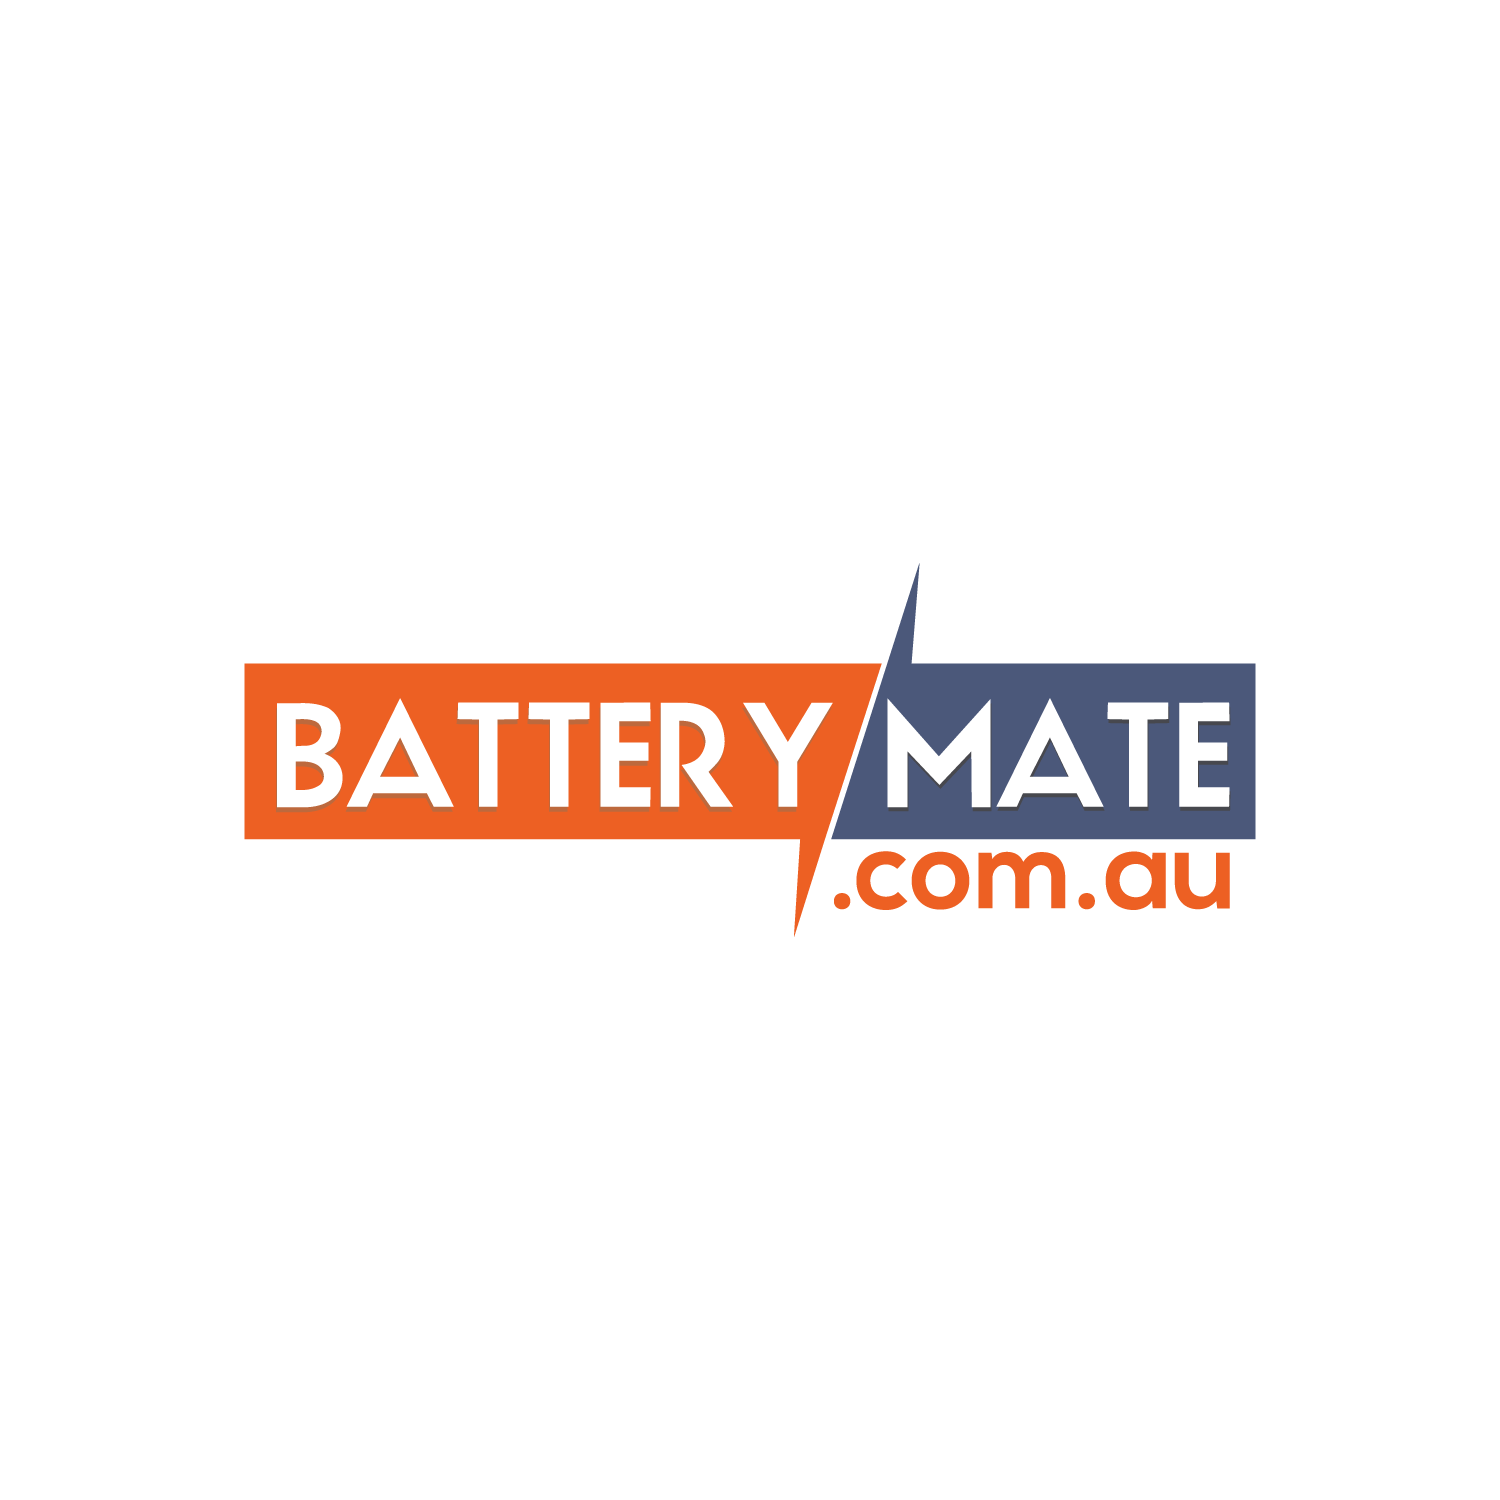 BatteryMate Ensures Fast and Seamless Delivery of High-Quality Batteries in Australia